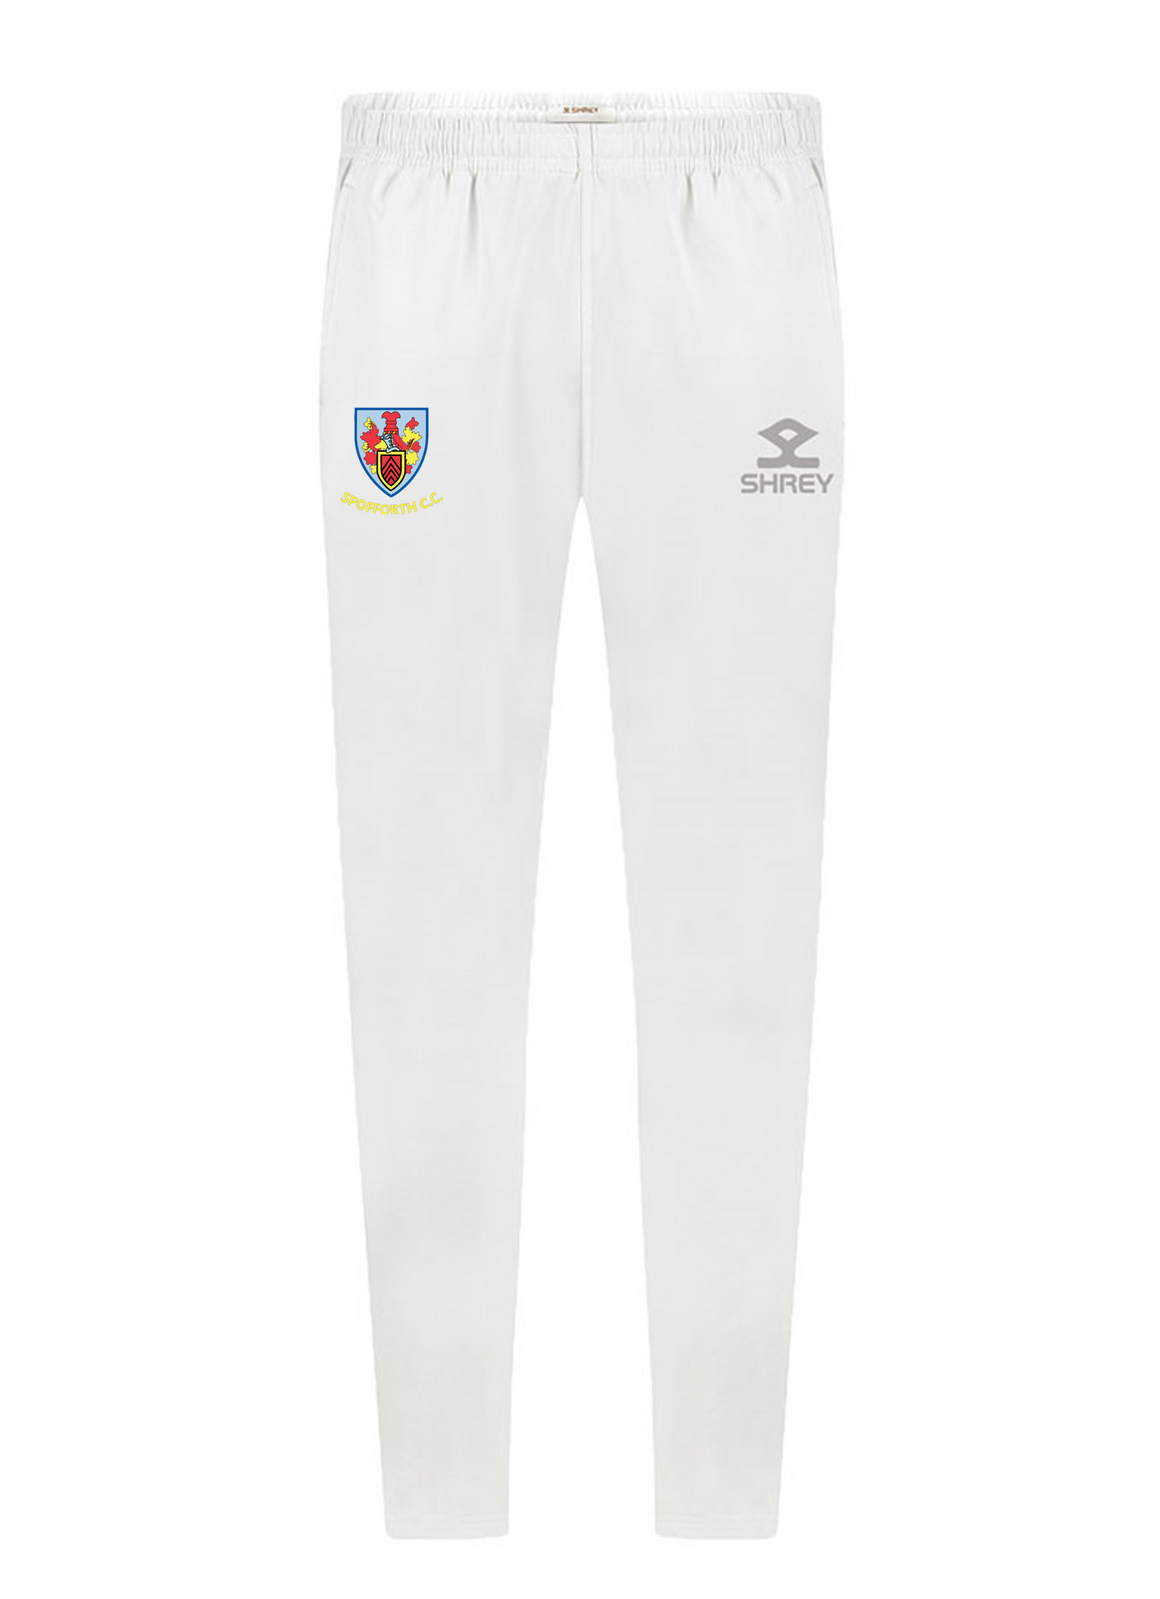 Spofforth C.C. Elite Playing Trousers